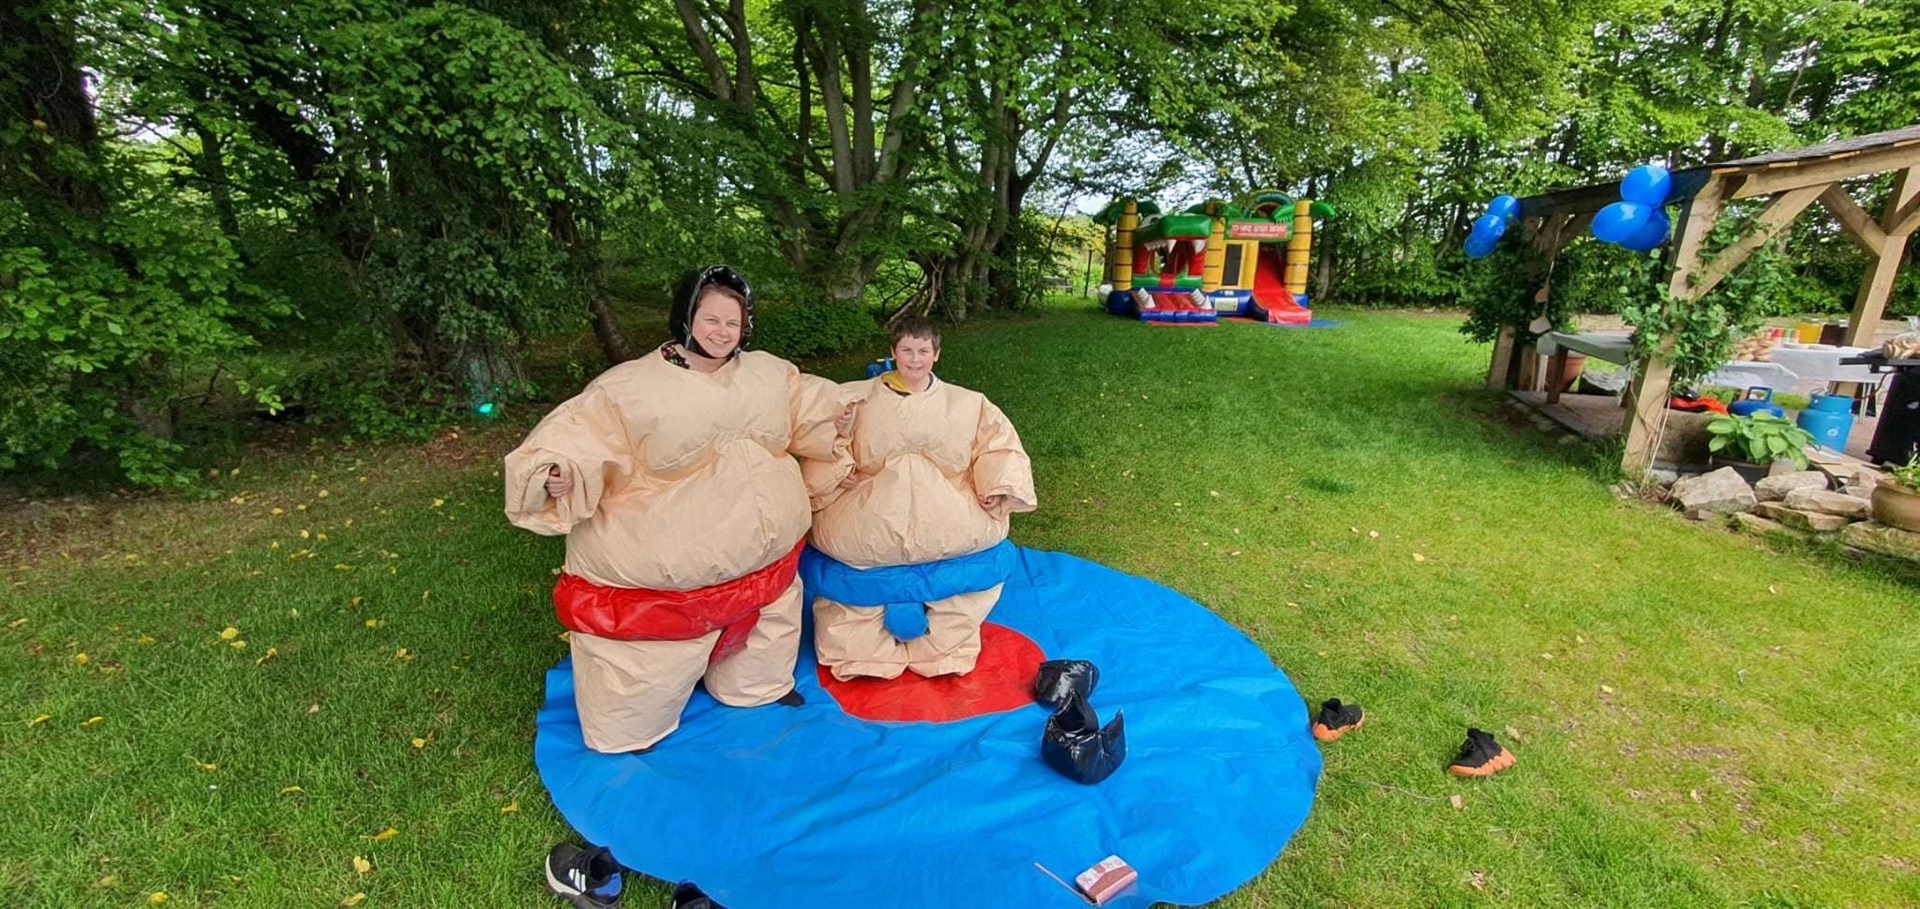 Conon Hotel first anniversary fun day: hotel manager Louise MacPhee and her son Max in sumo suits.